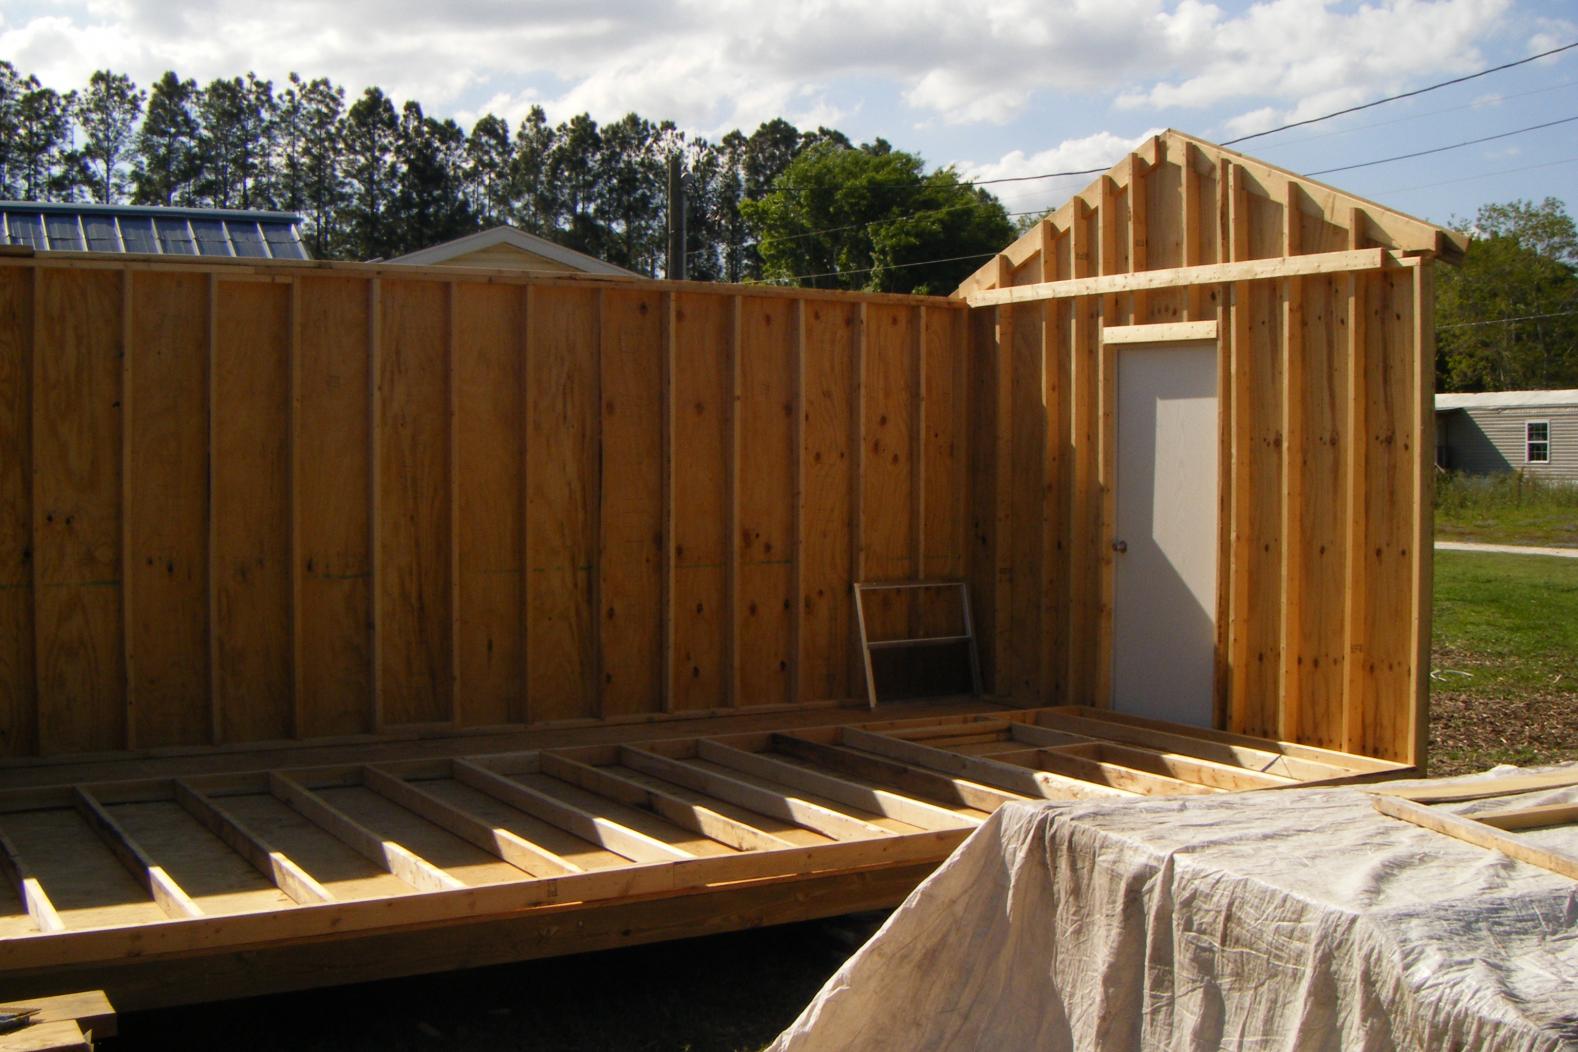 12x24 shed plans how to build diy by